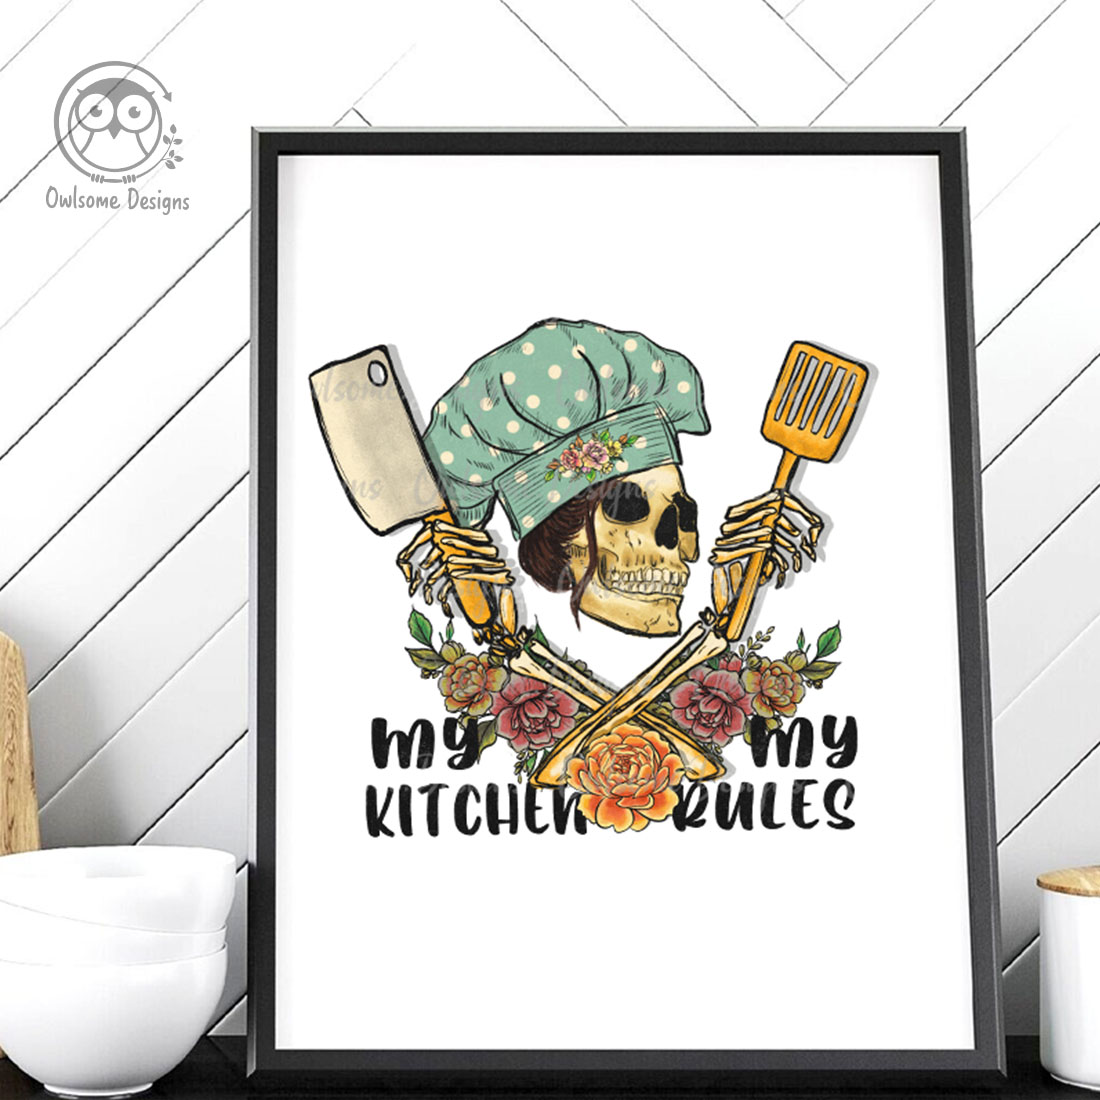 Adorable skeleton painting image with kitchen accessories.